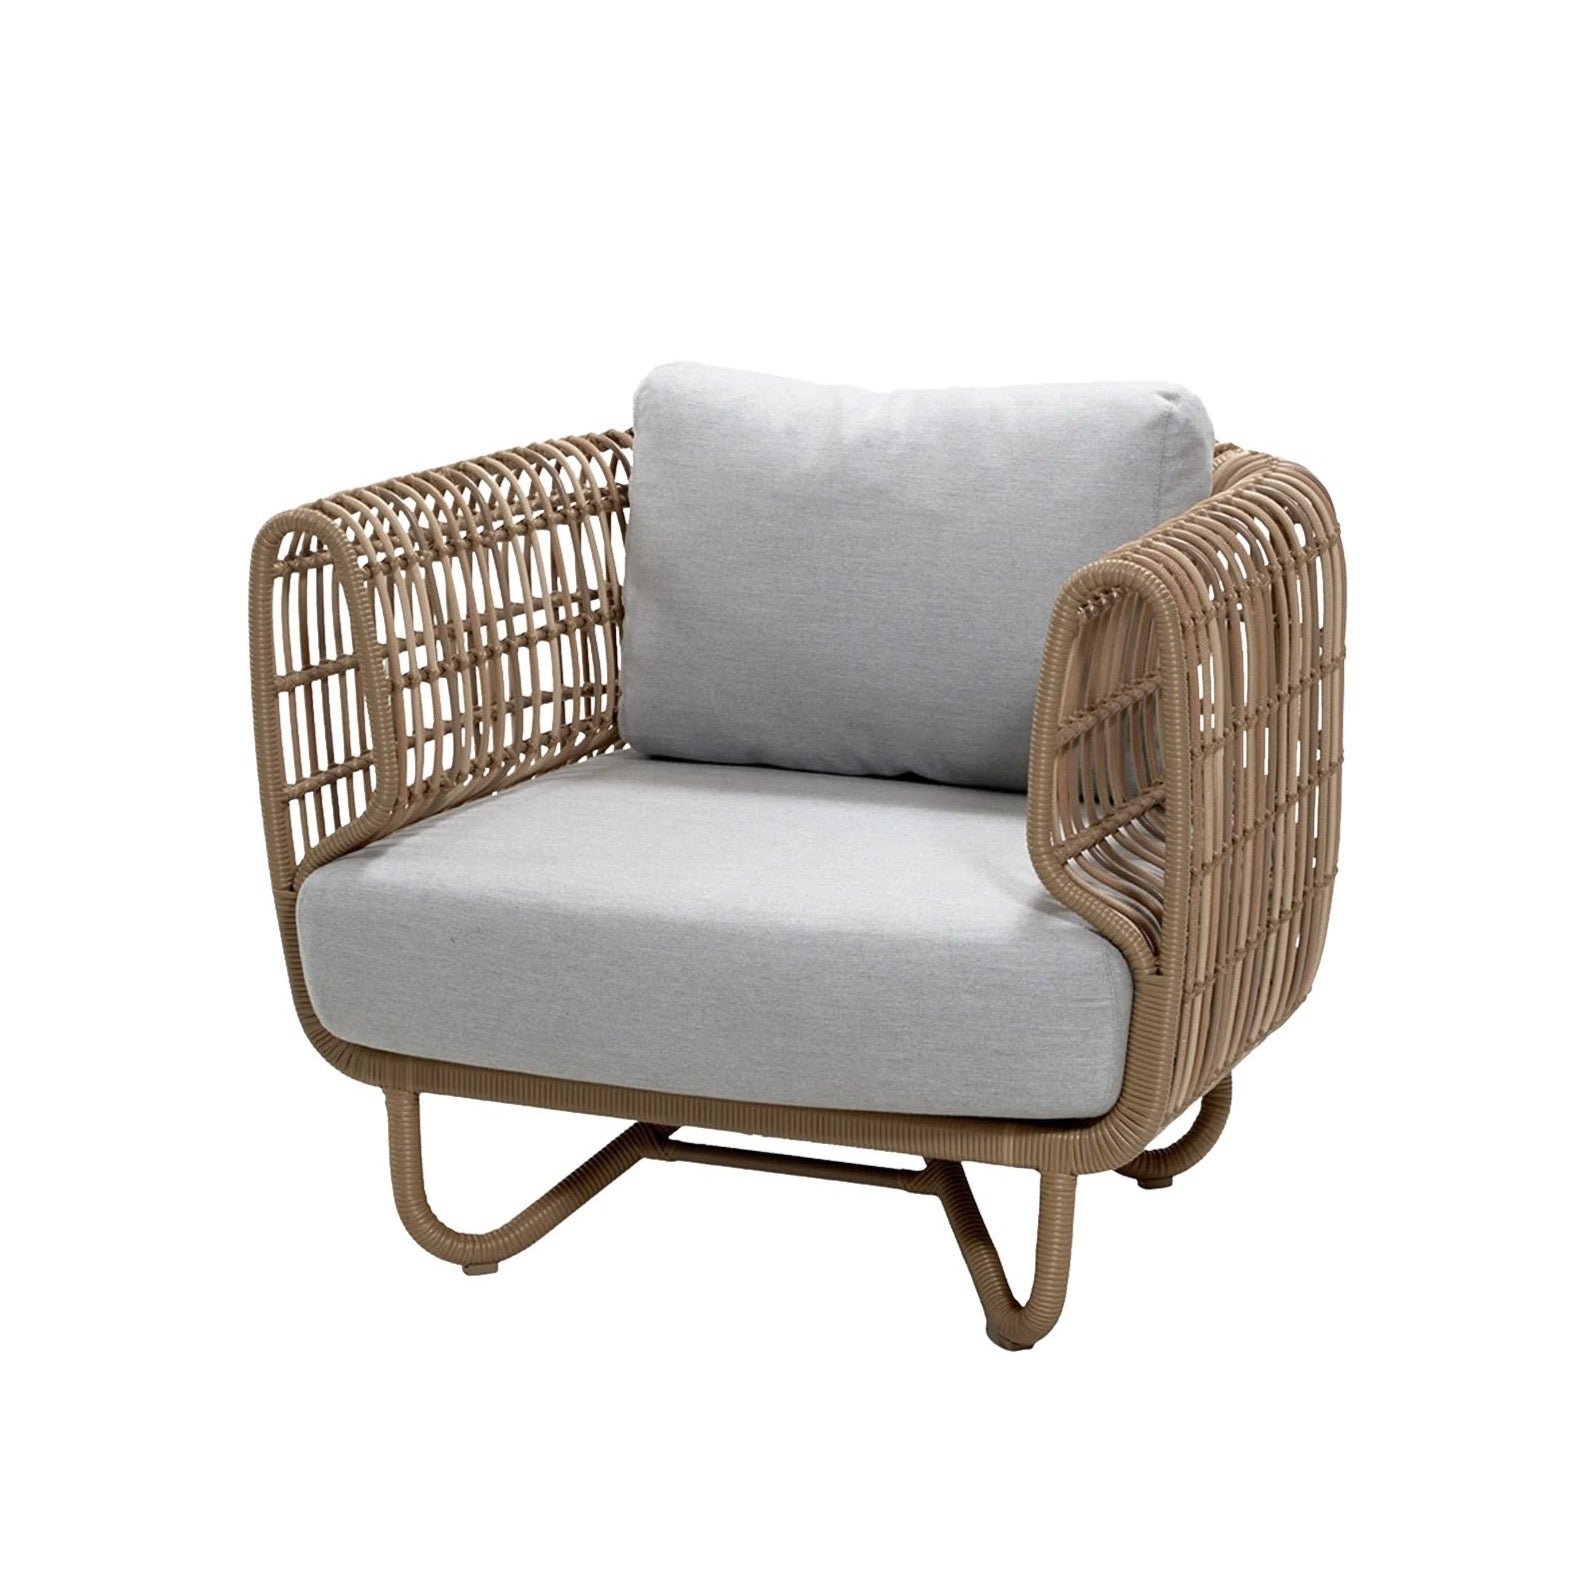 Cane-Line Nest lounge chair